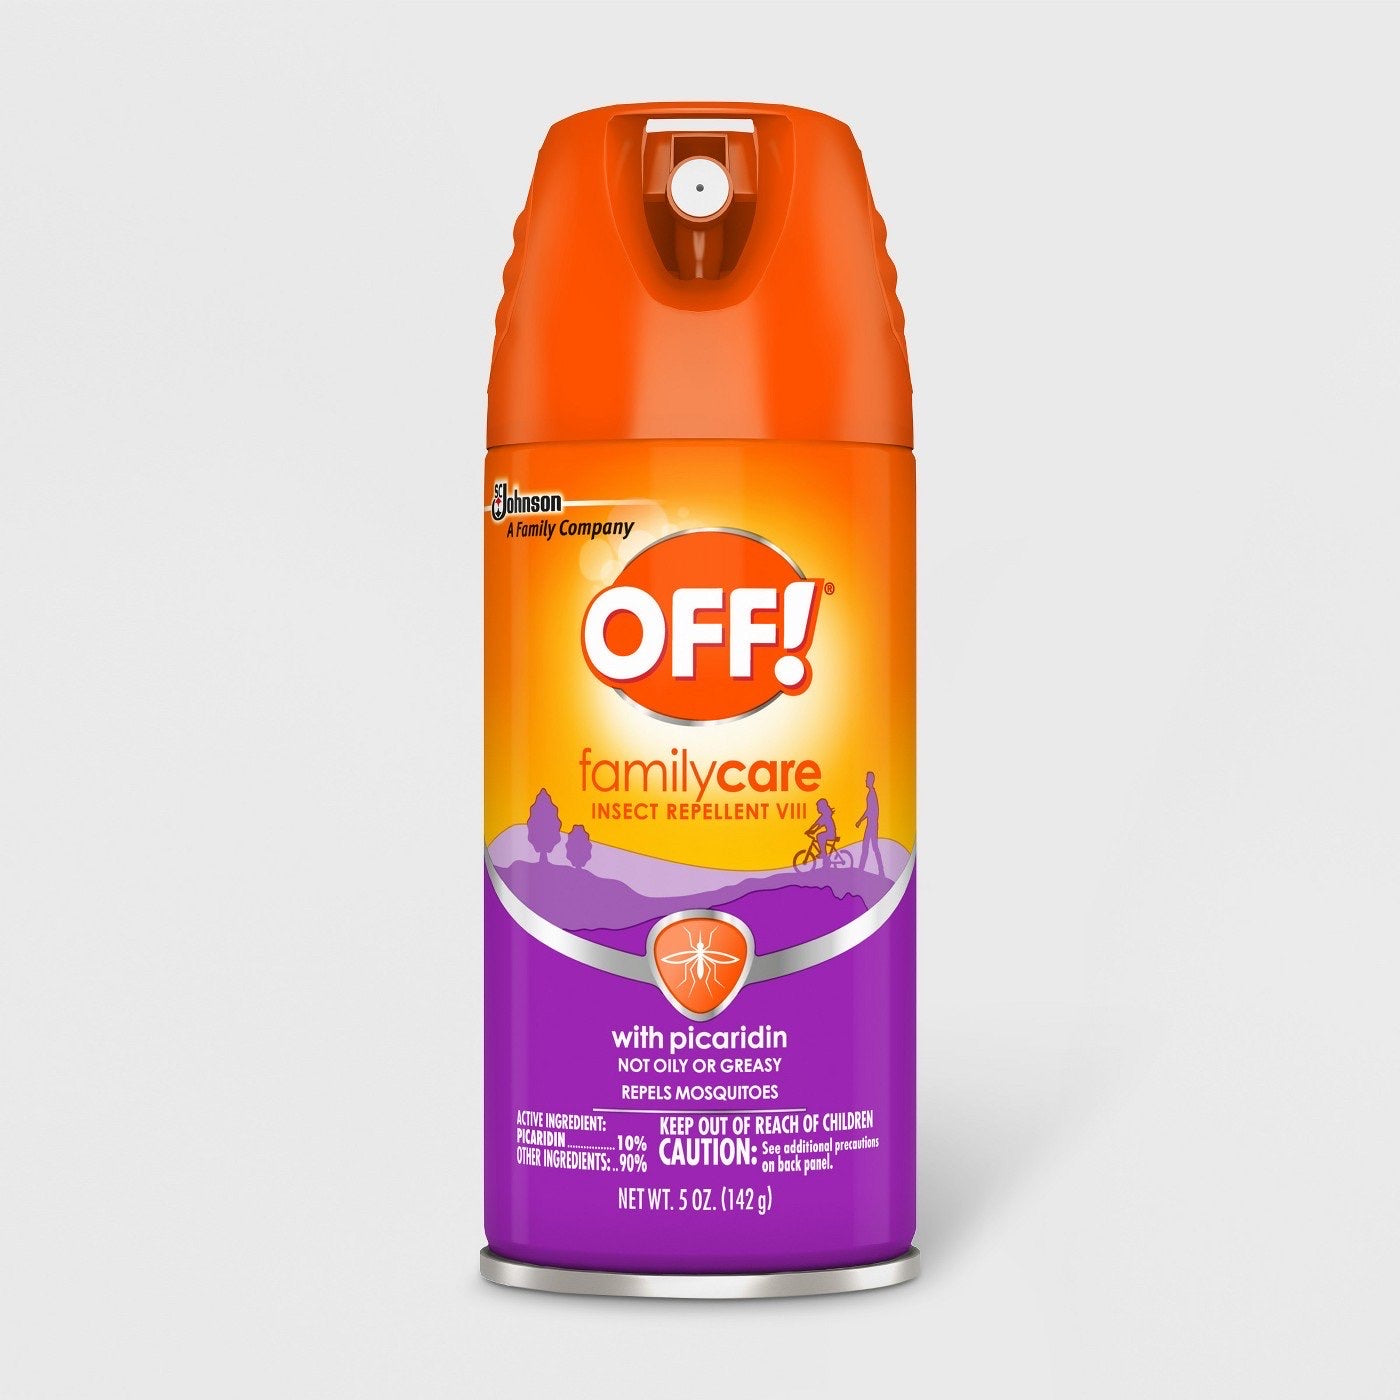 OFF! FamilyCare Insect Repellent VIII - 5oz